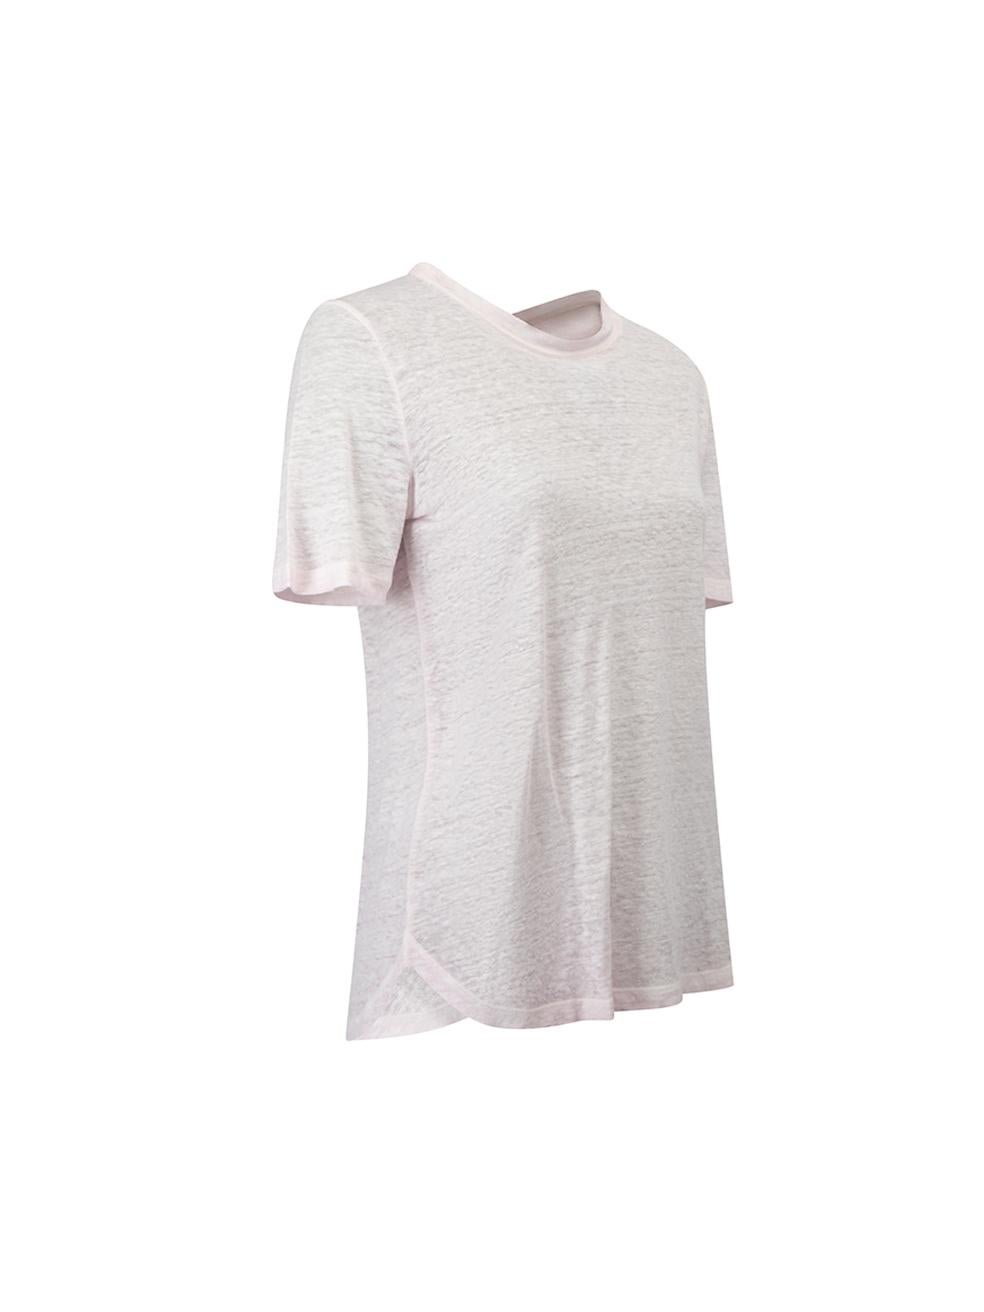 CONDITION is Very good. Minimal wear to top is evident. Minimal wear to the centre-front with a faint mark on this used Maje designer resale item. 
 
 Details
  Pink
 Linen
 Short sleeves T shirt
 Round neckline
 
 
 Made in China
 
 Composition
